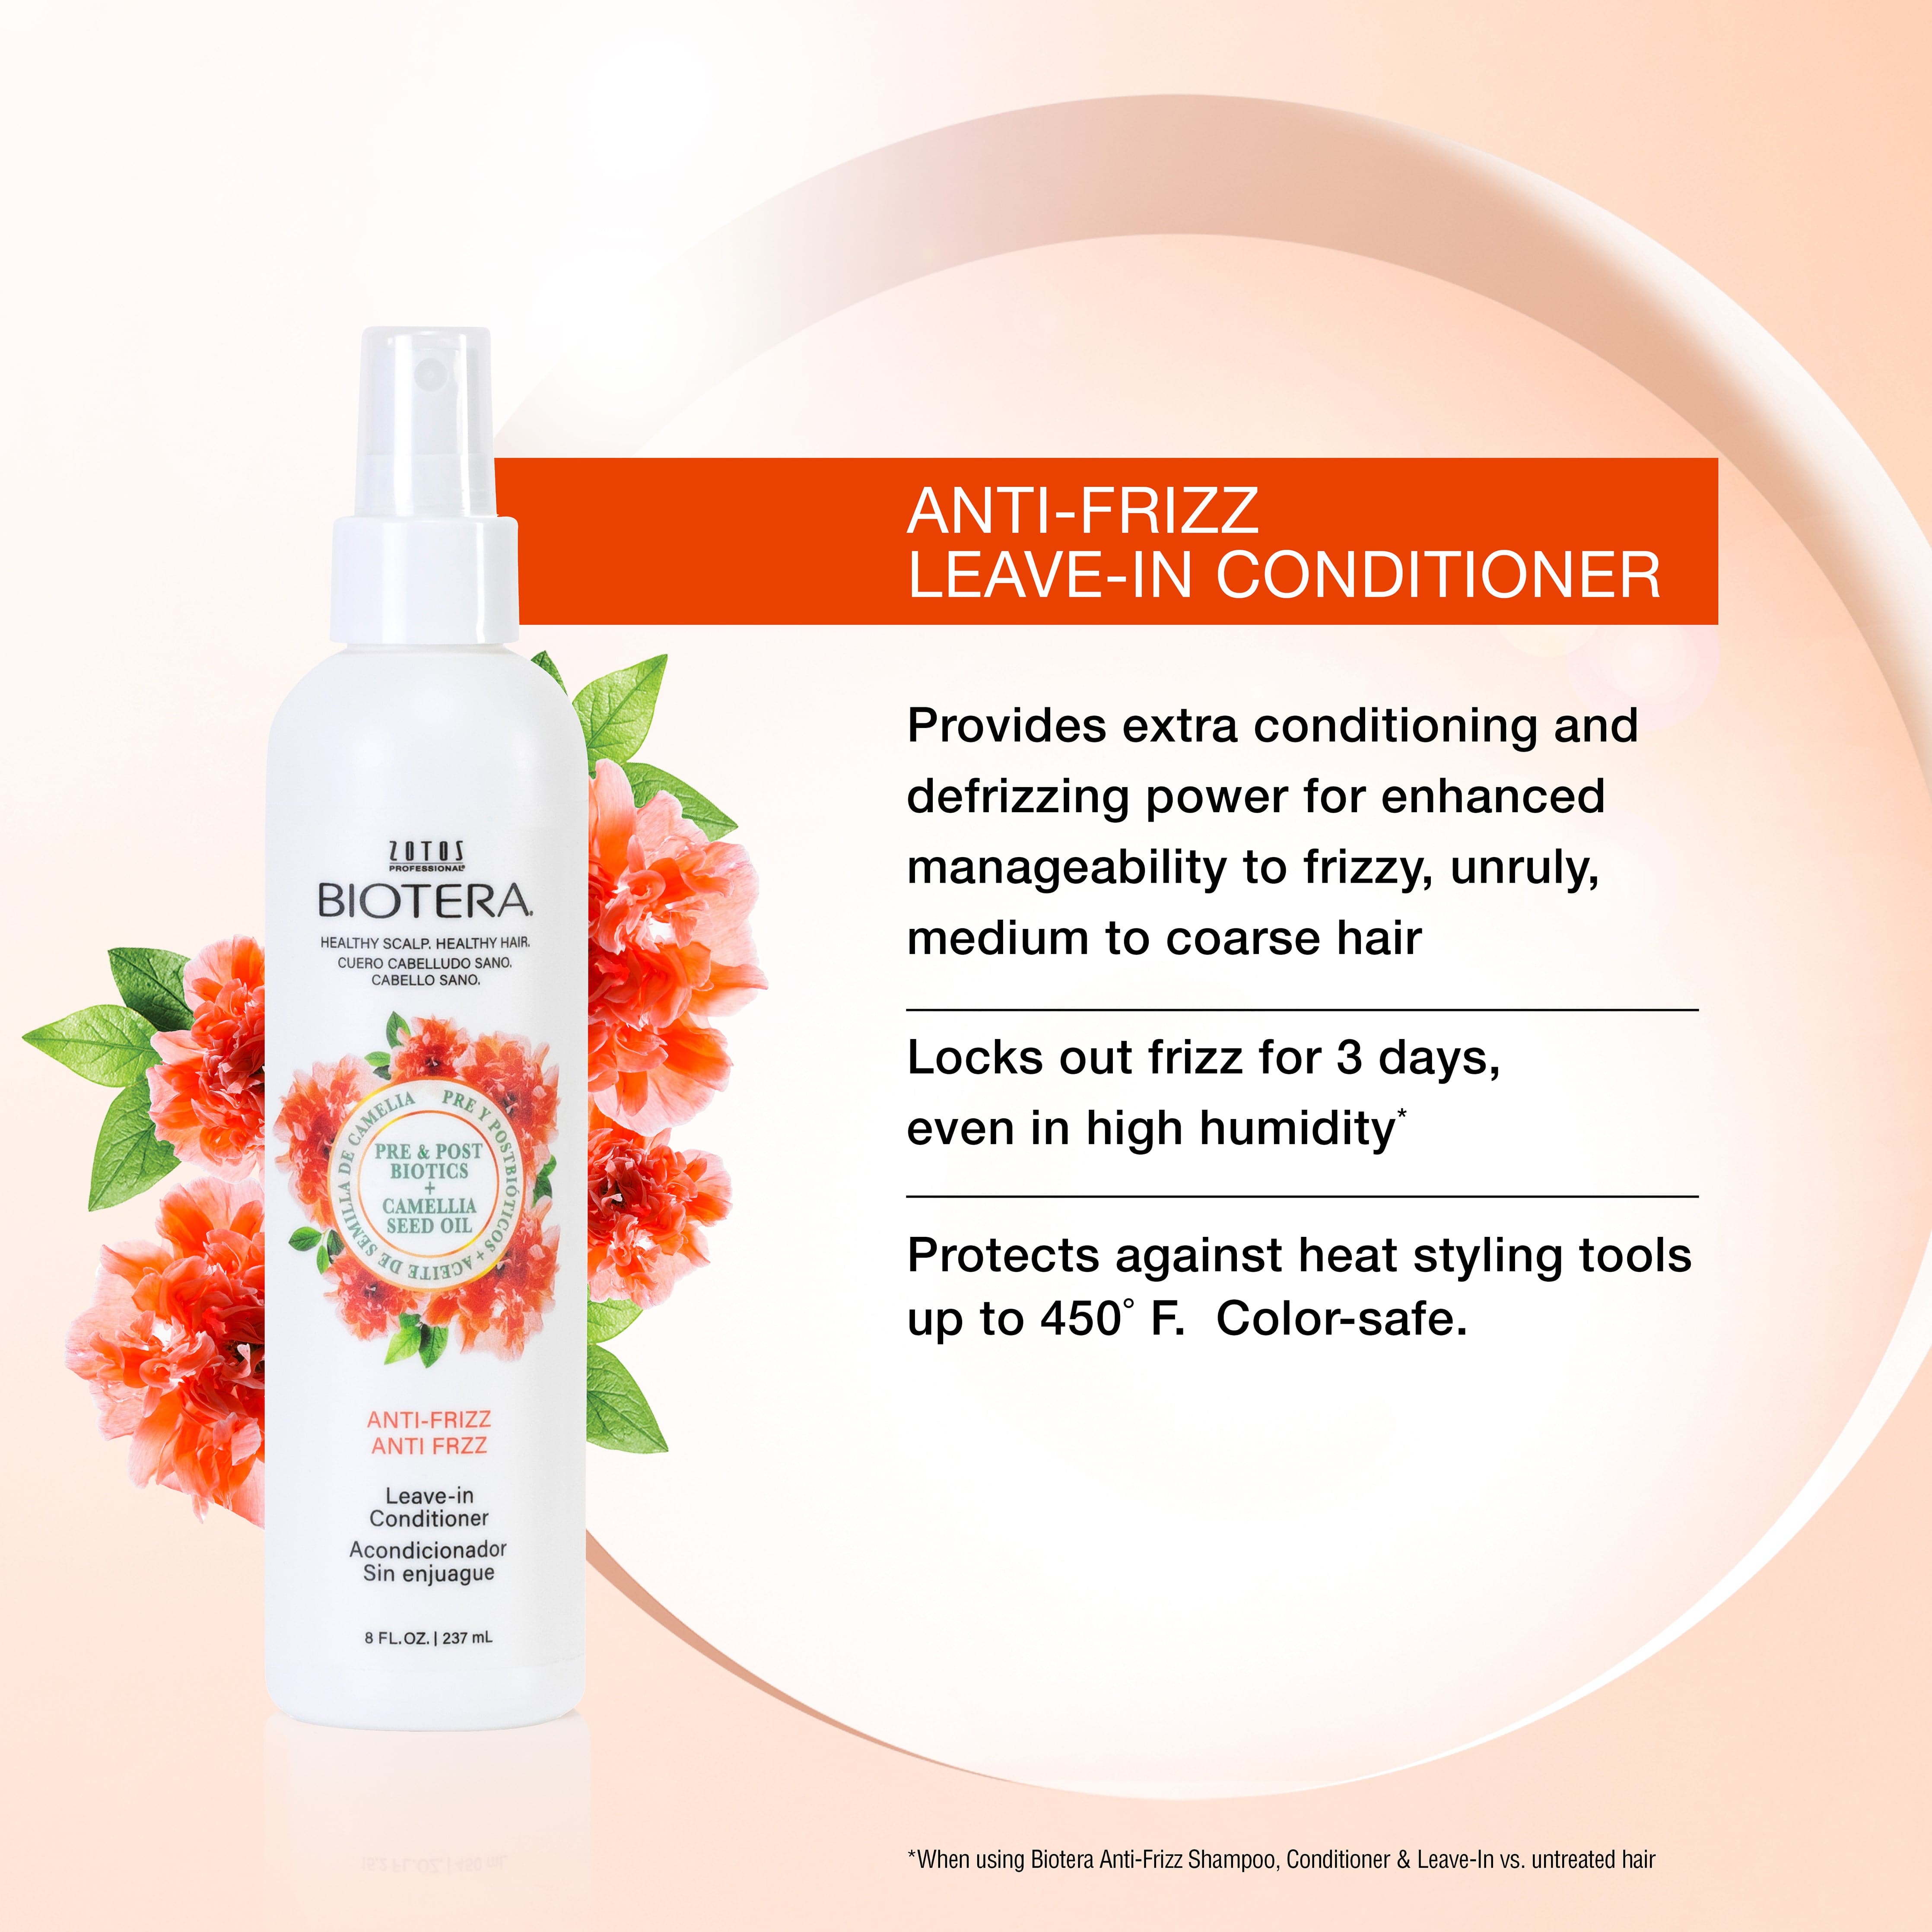 Biotera anti frizz leave in conditioner locks out frizz for 3 days even in high humidity and protects from heat styling tools.